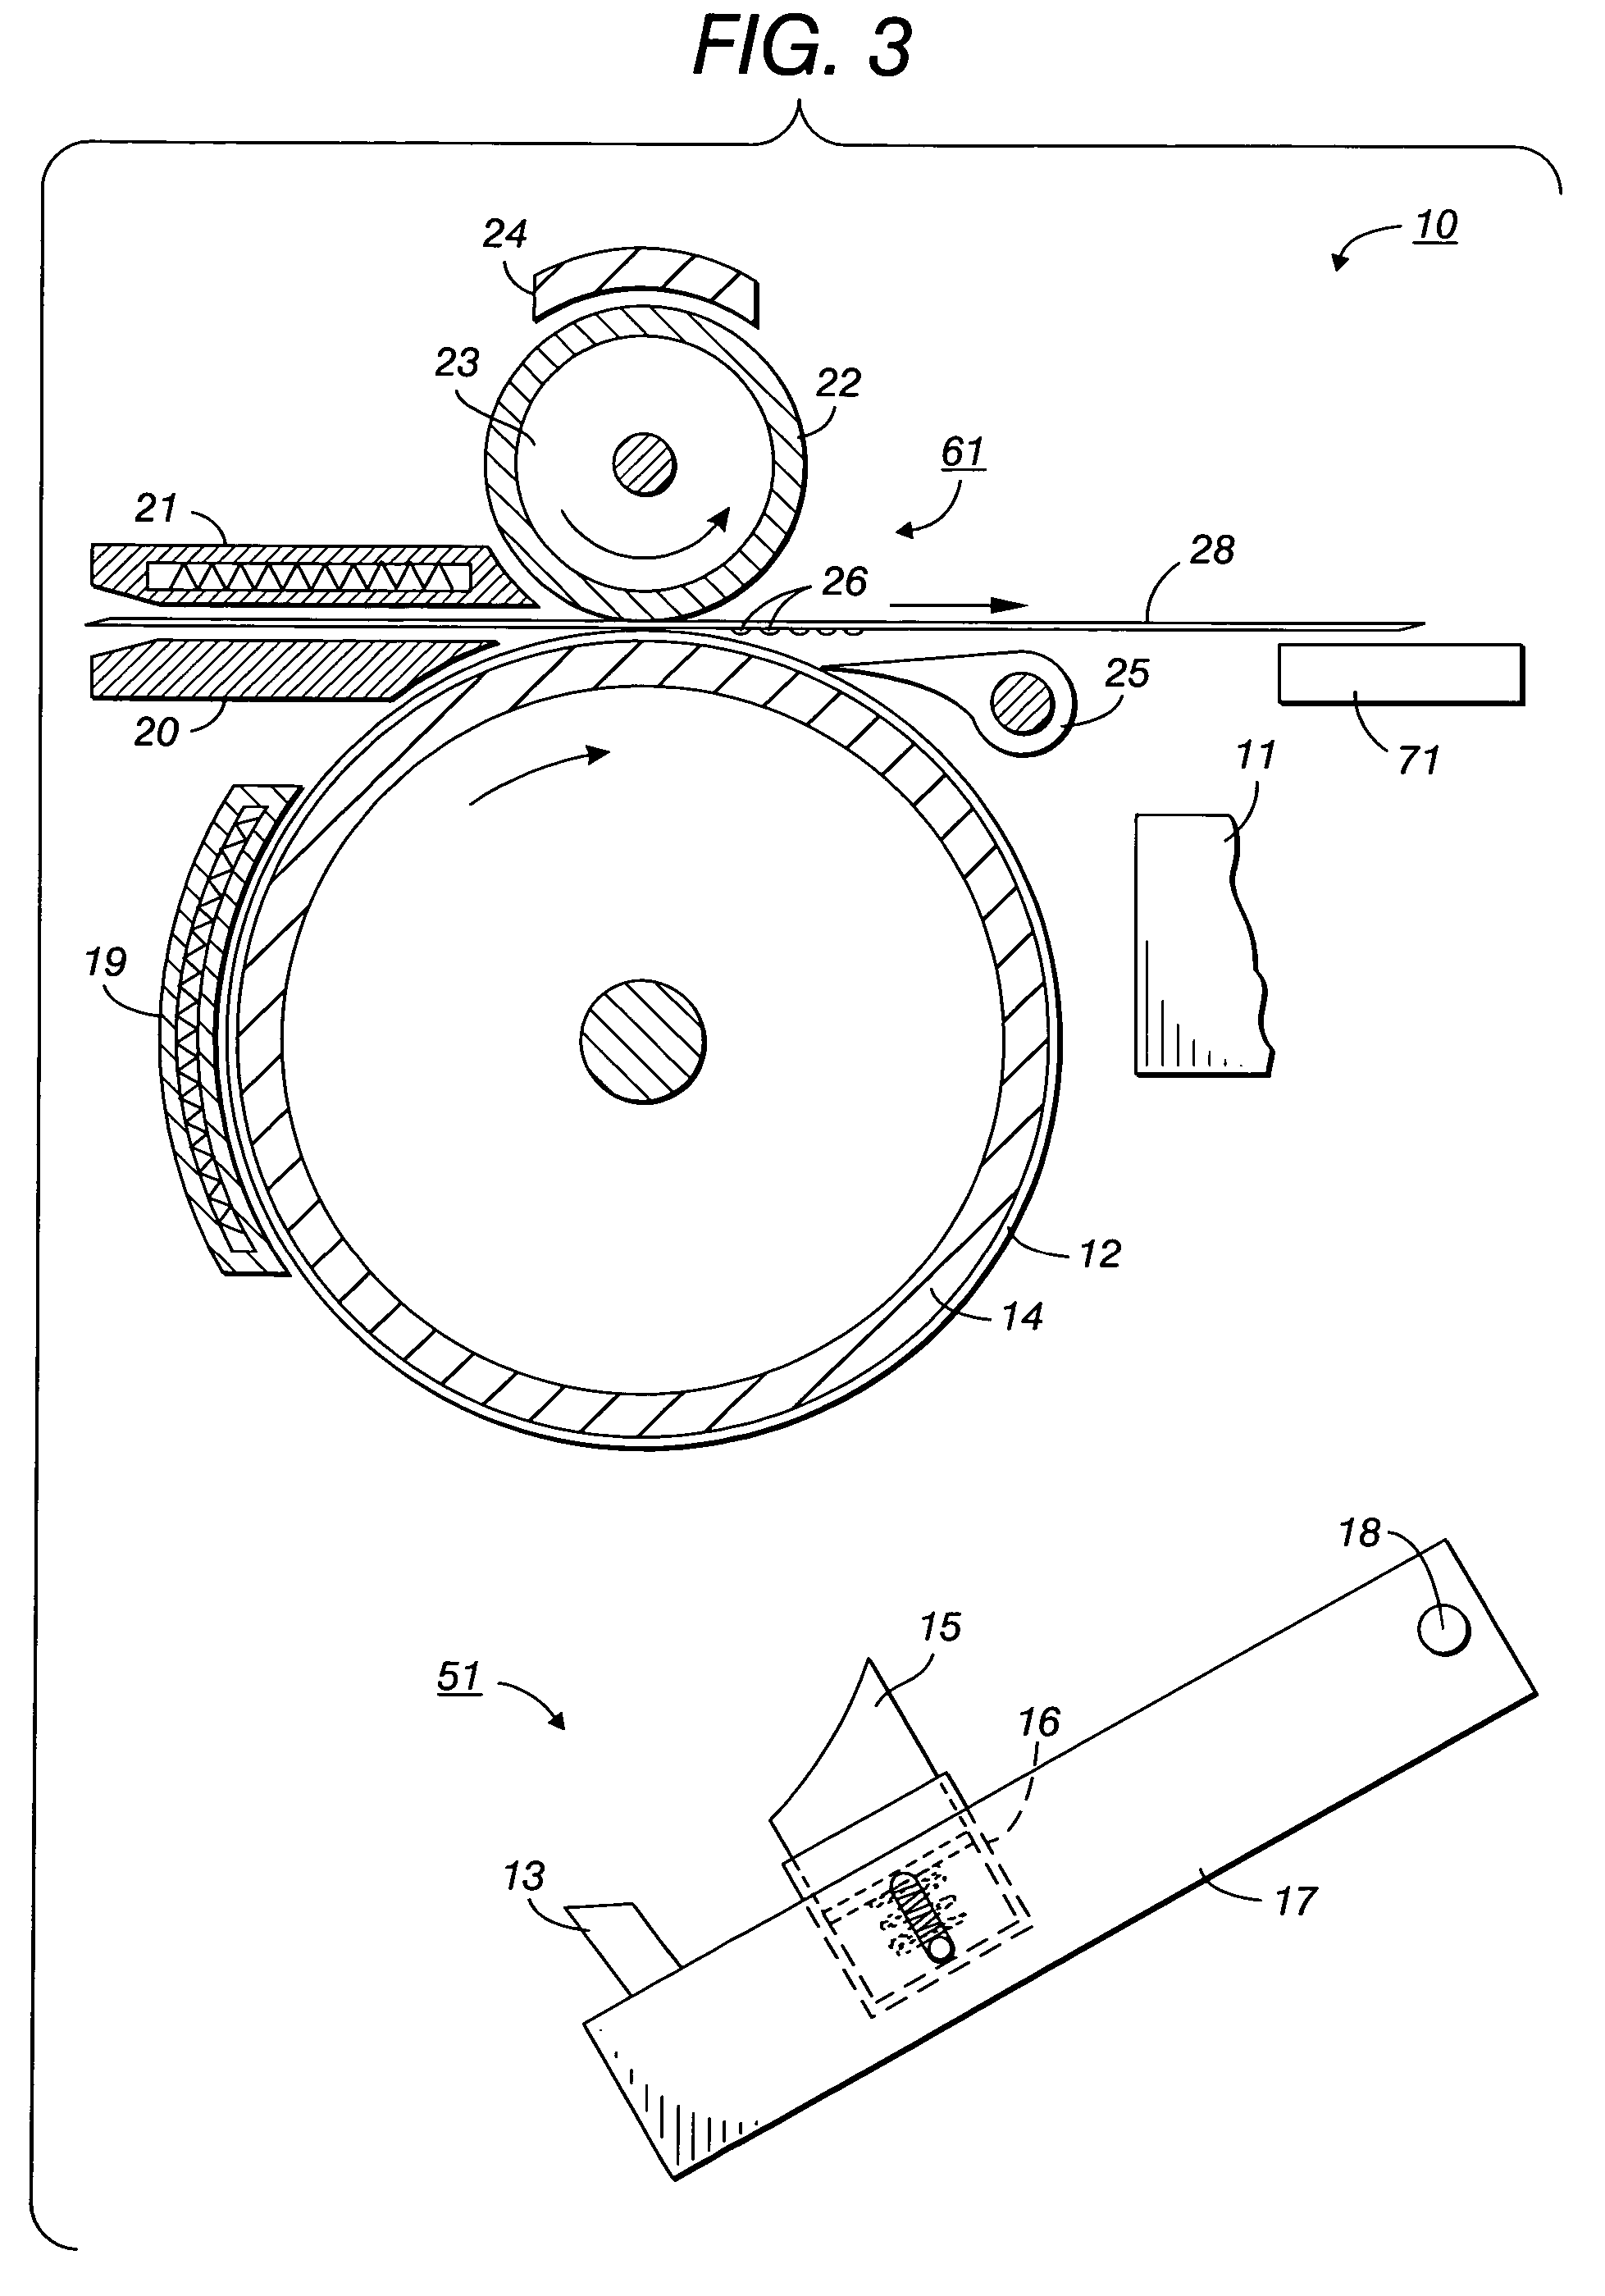 Printing apparatus and processes employing intermediate transfer with molten intermediate transfer materials